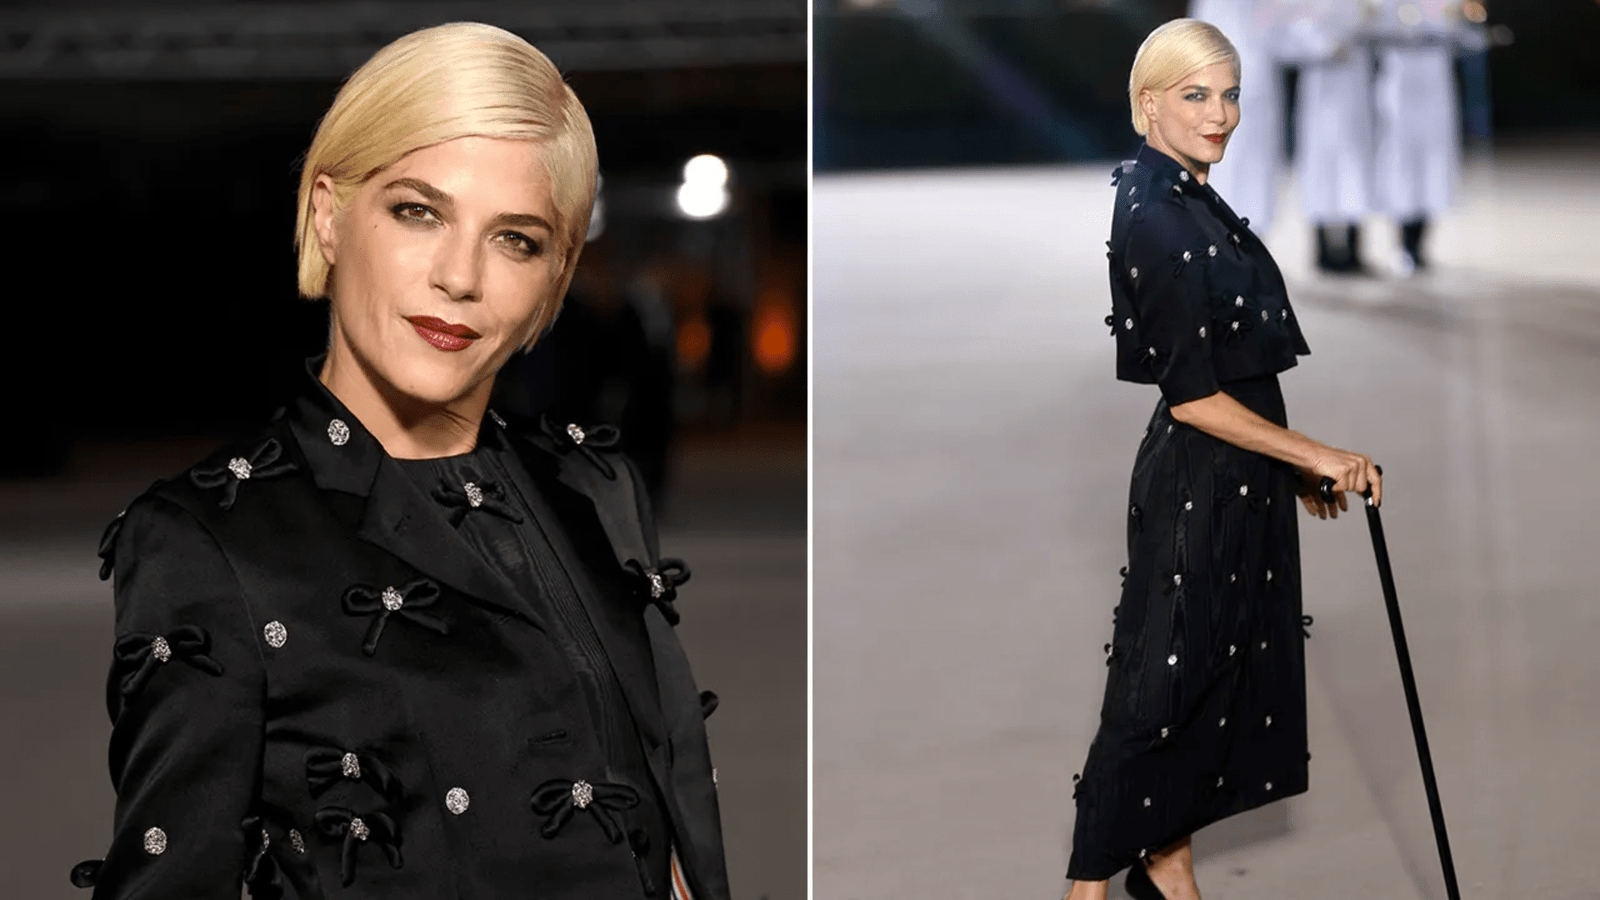 Selma Blair Opens Up About Ongoing Struggles with Multiple Sclerosis and Ehlers-Danlos Syndrome